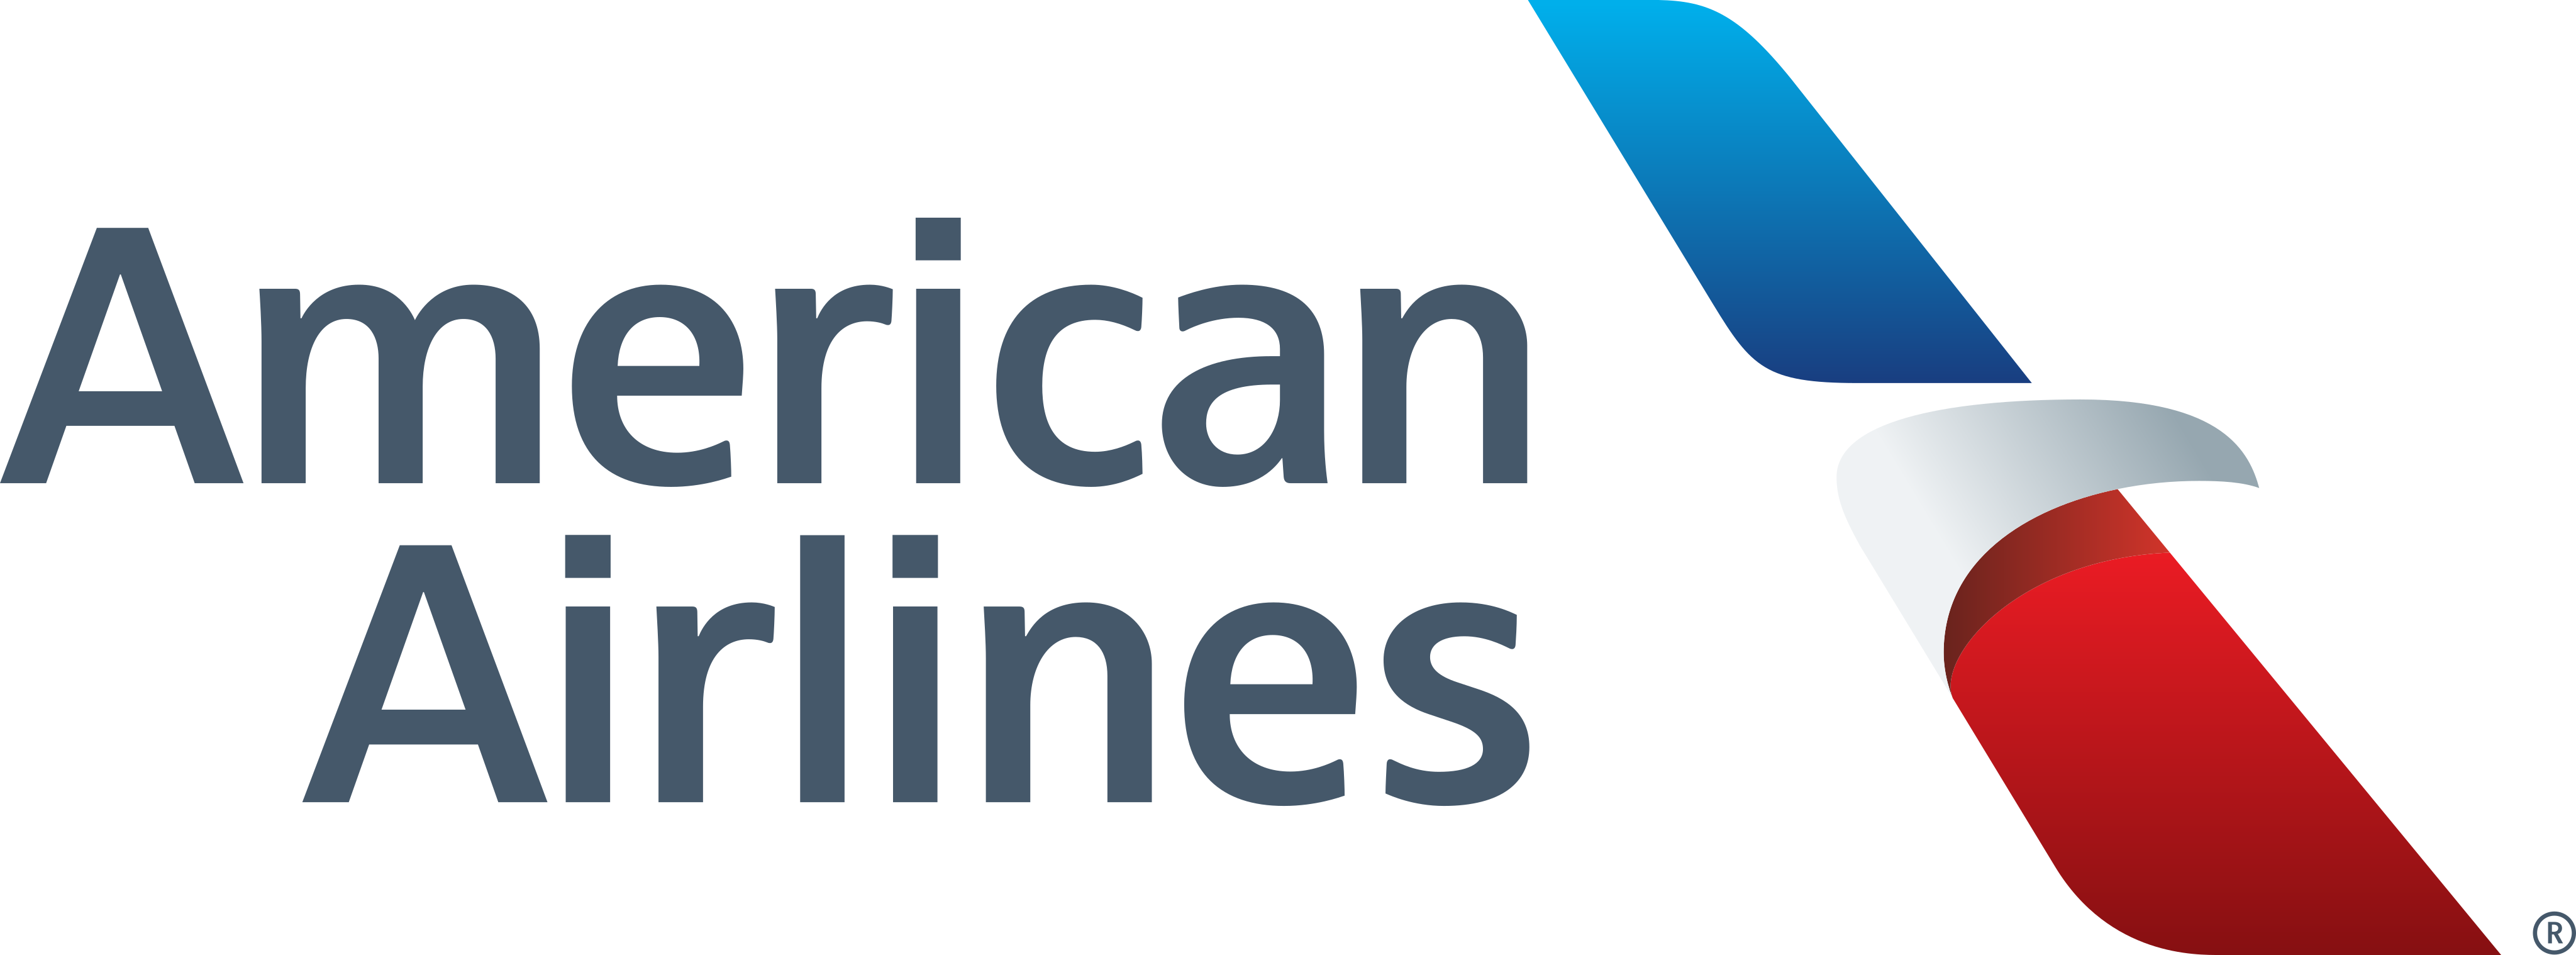 American Airlines Logo PNG Image